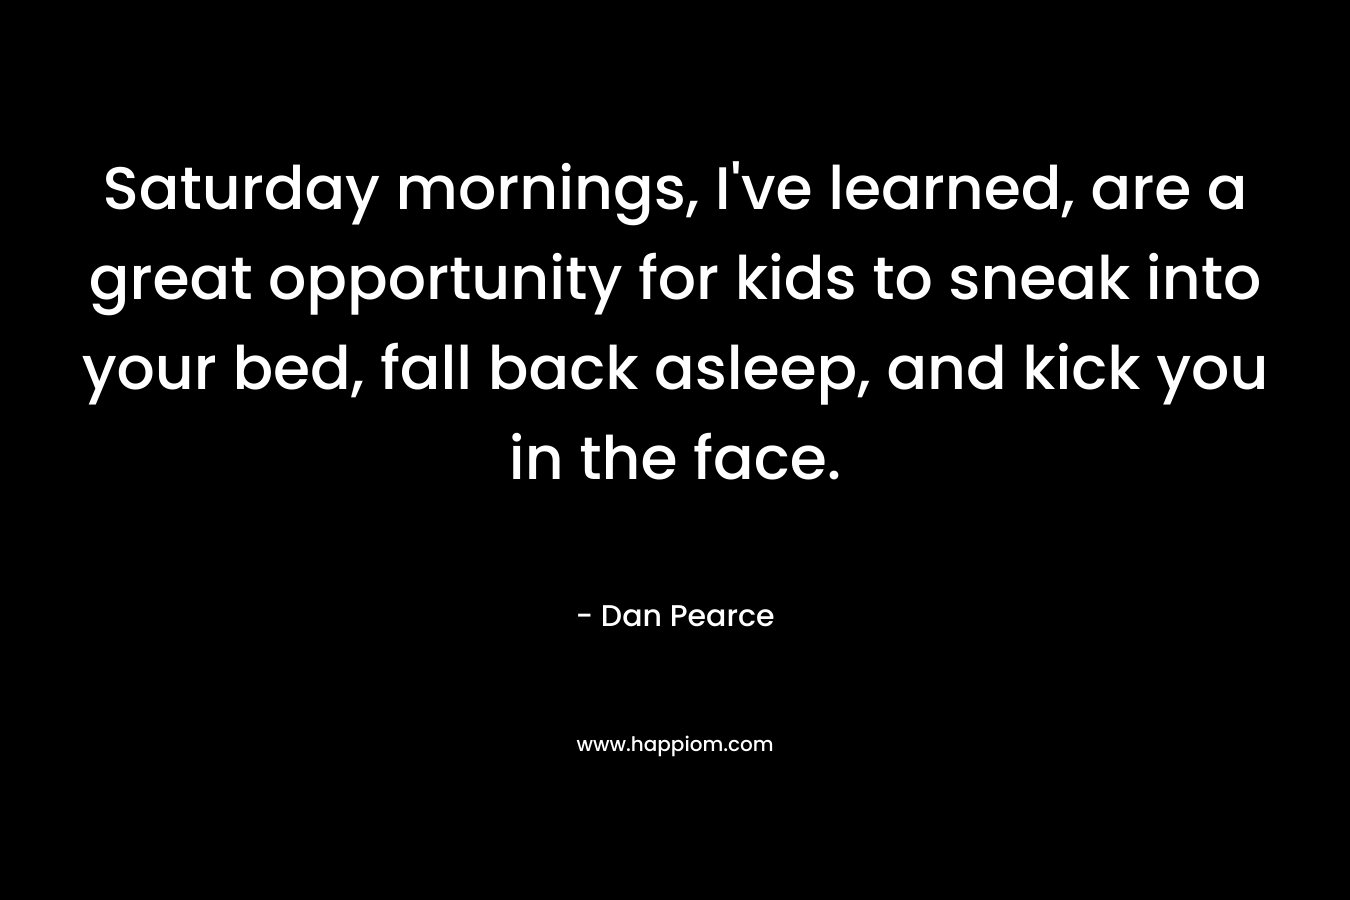 Saturday mornings, I’ve learned, are a great opportunity for kids to sneak into your bed, fall back asleep, and kick you in the face. – Dan Pearce